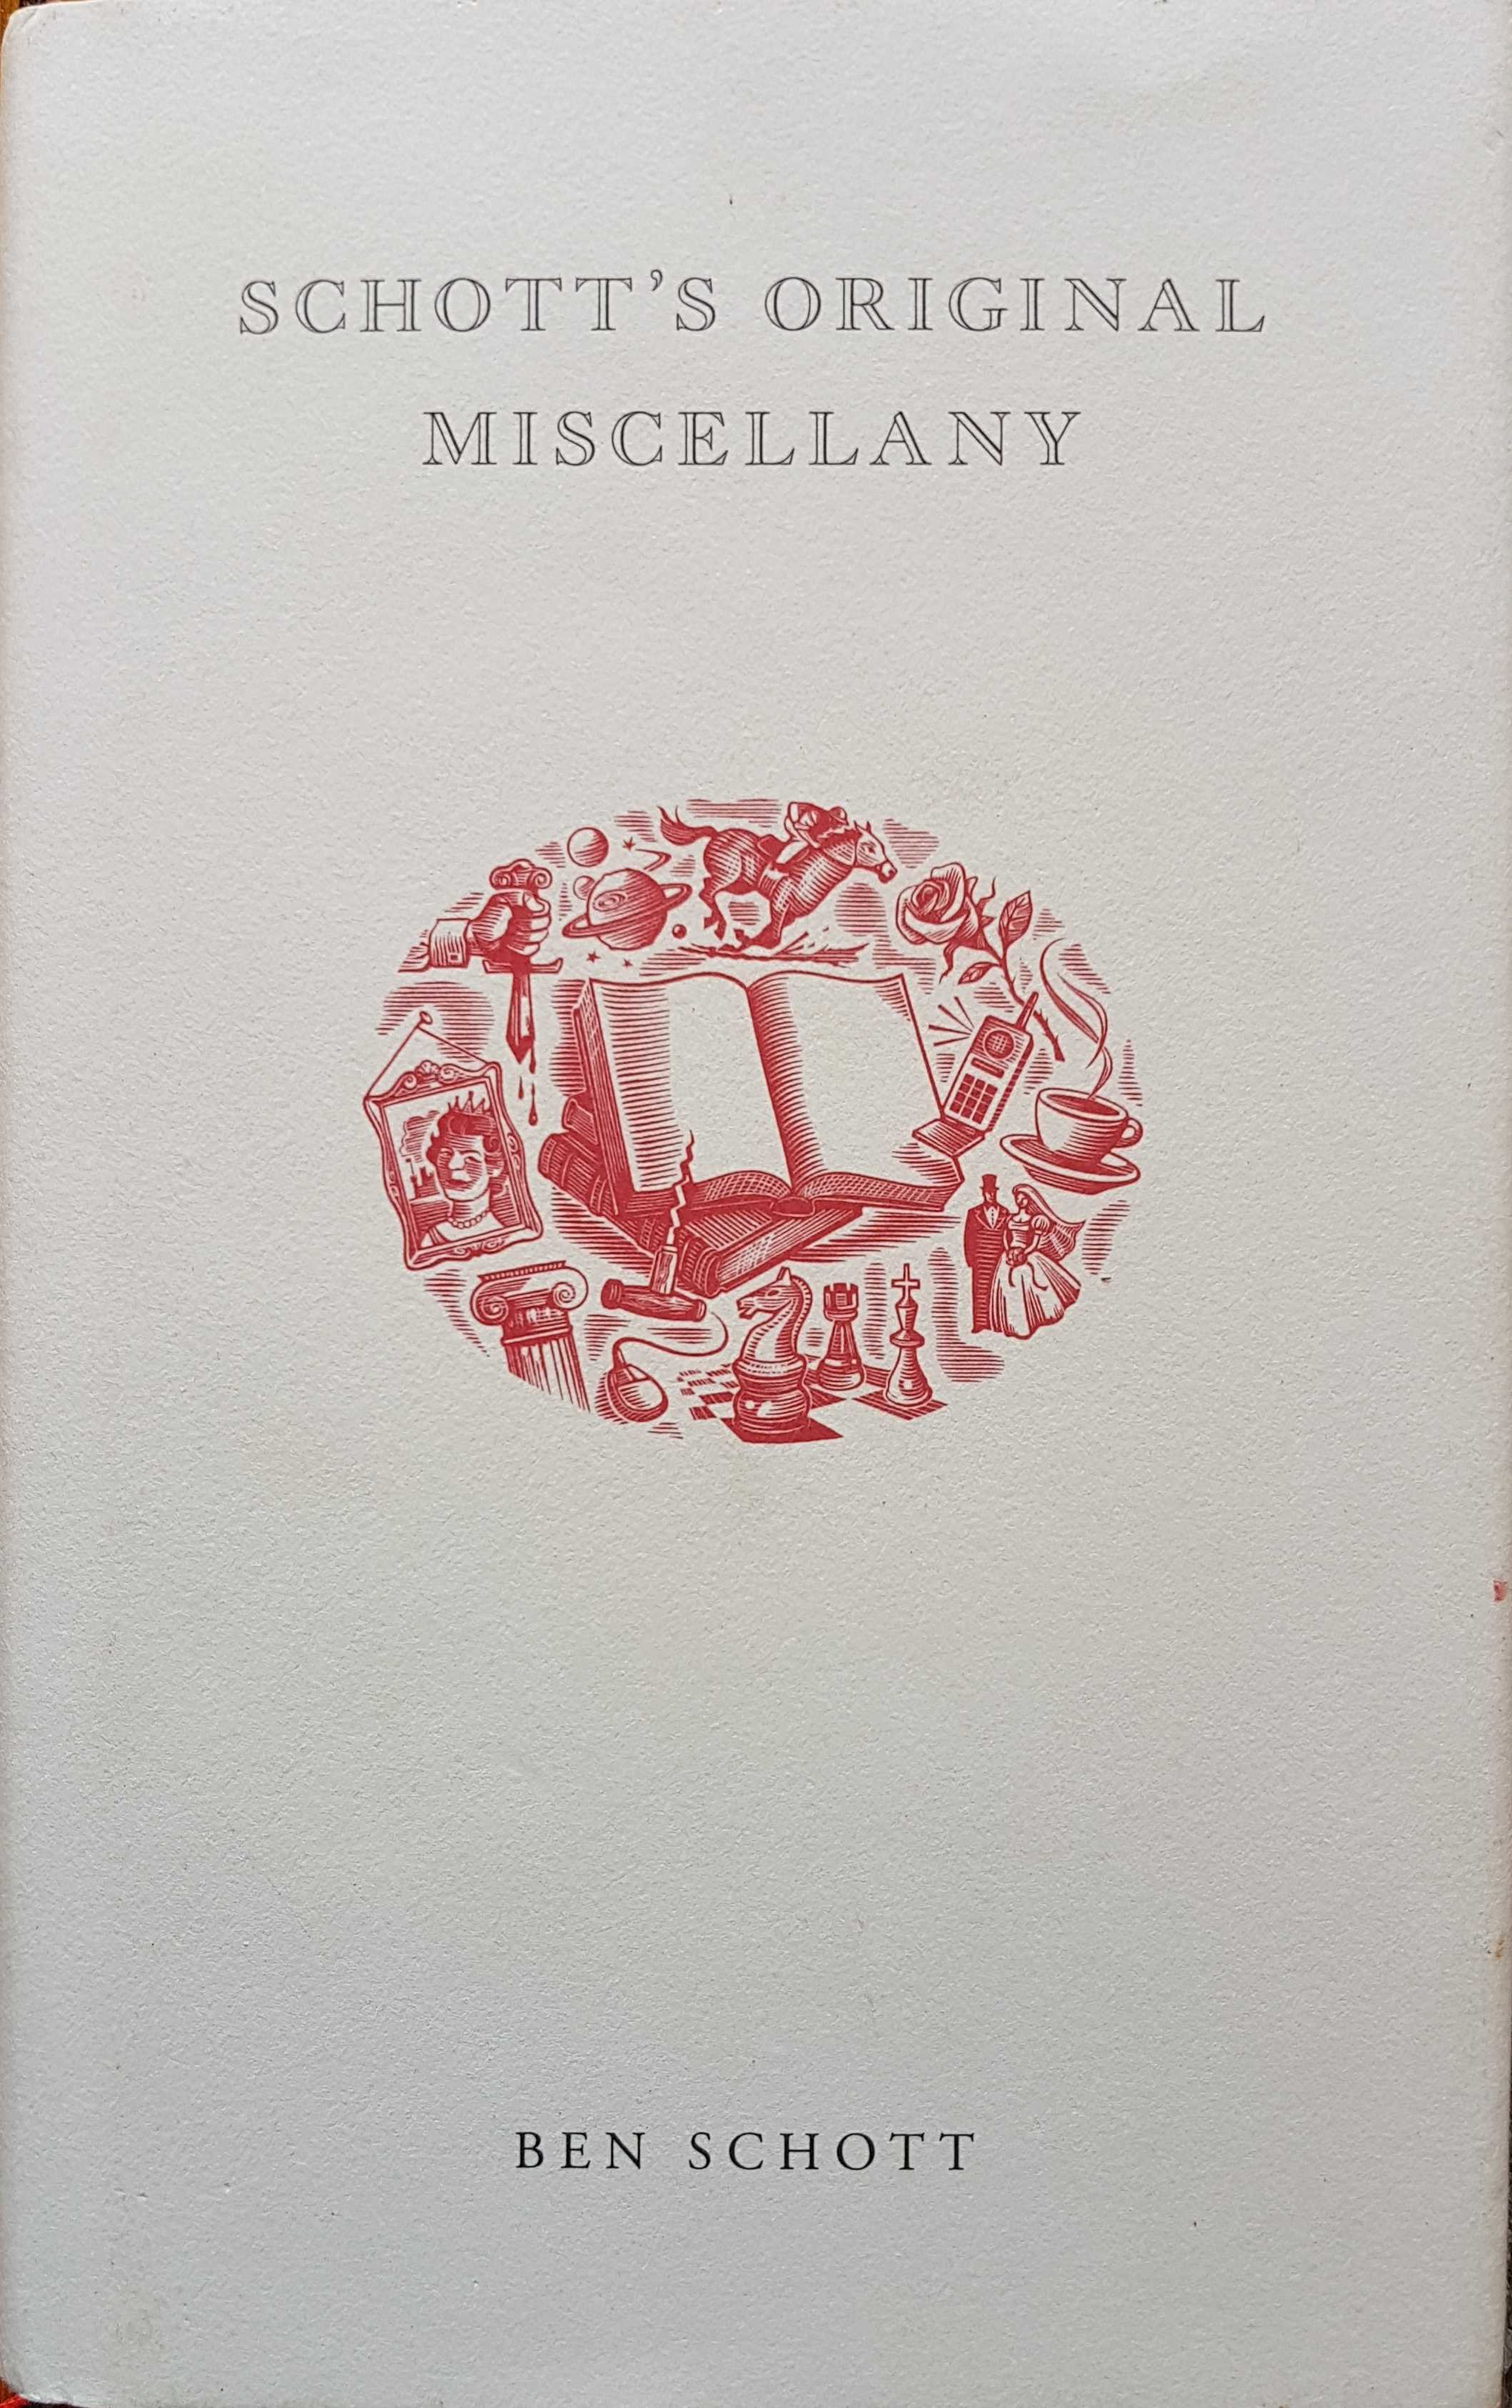 Picture of 978-0-7475-6320-4 Schott's original miscellany book by artist Ben Schott from ITV, Channel 4 and Channel 5 library